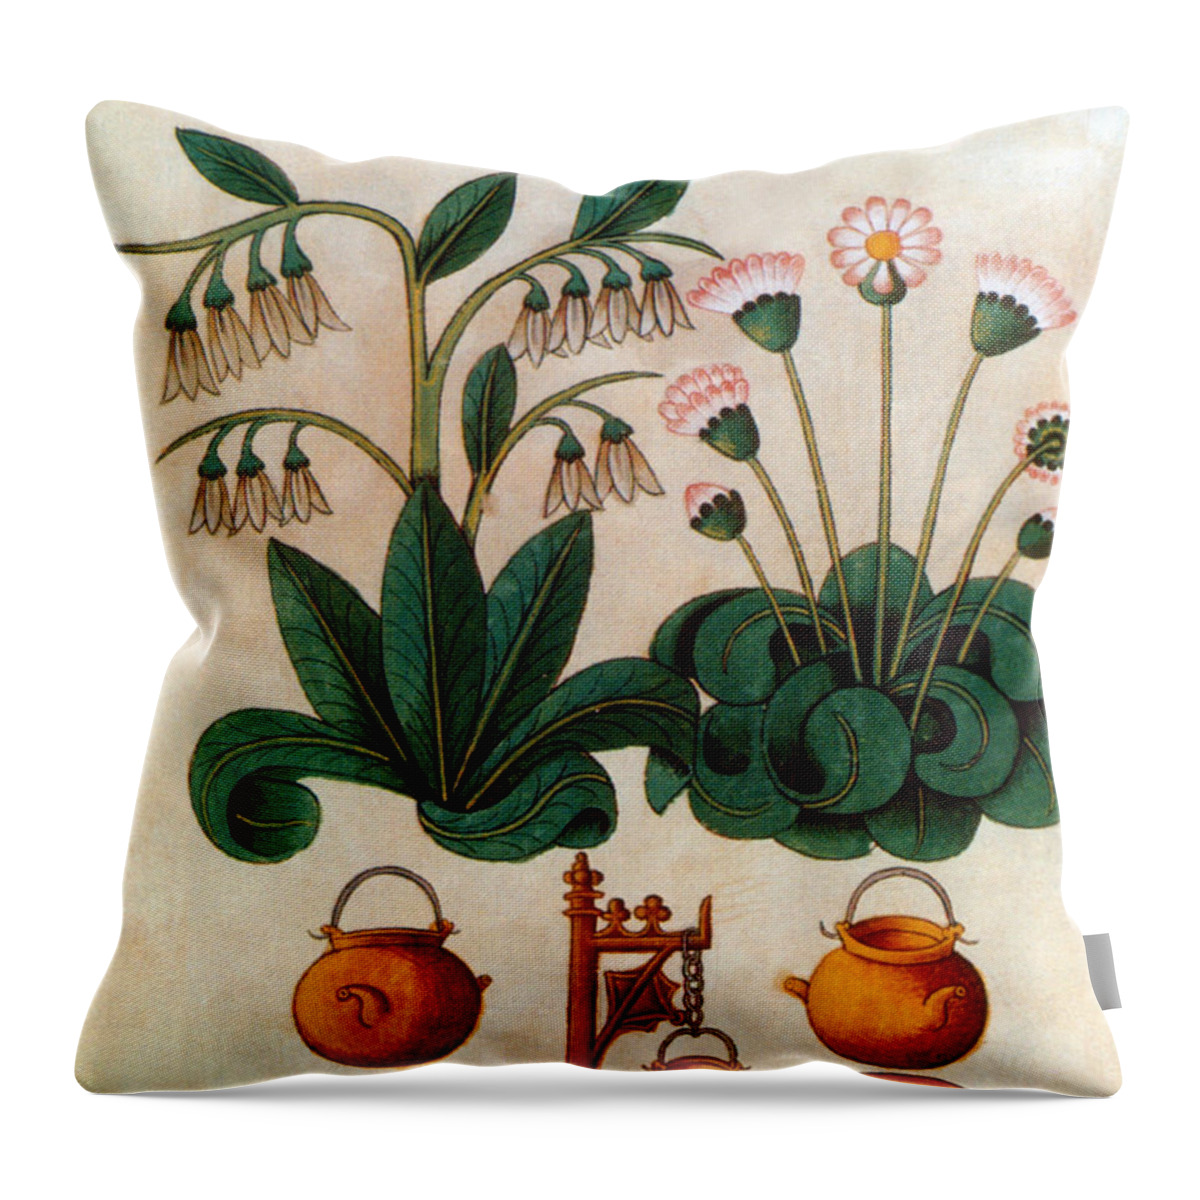 Bellis Perennis Throw Pillow featuring the photograph Common Daisy by Bug Sutton